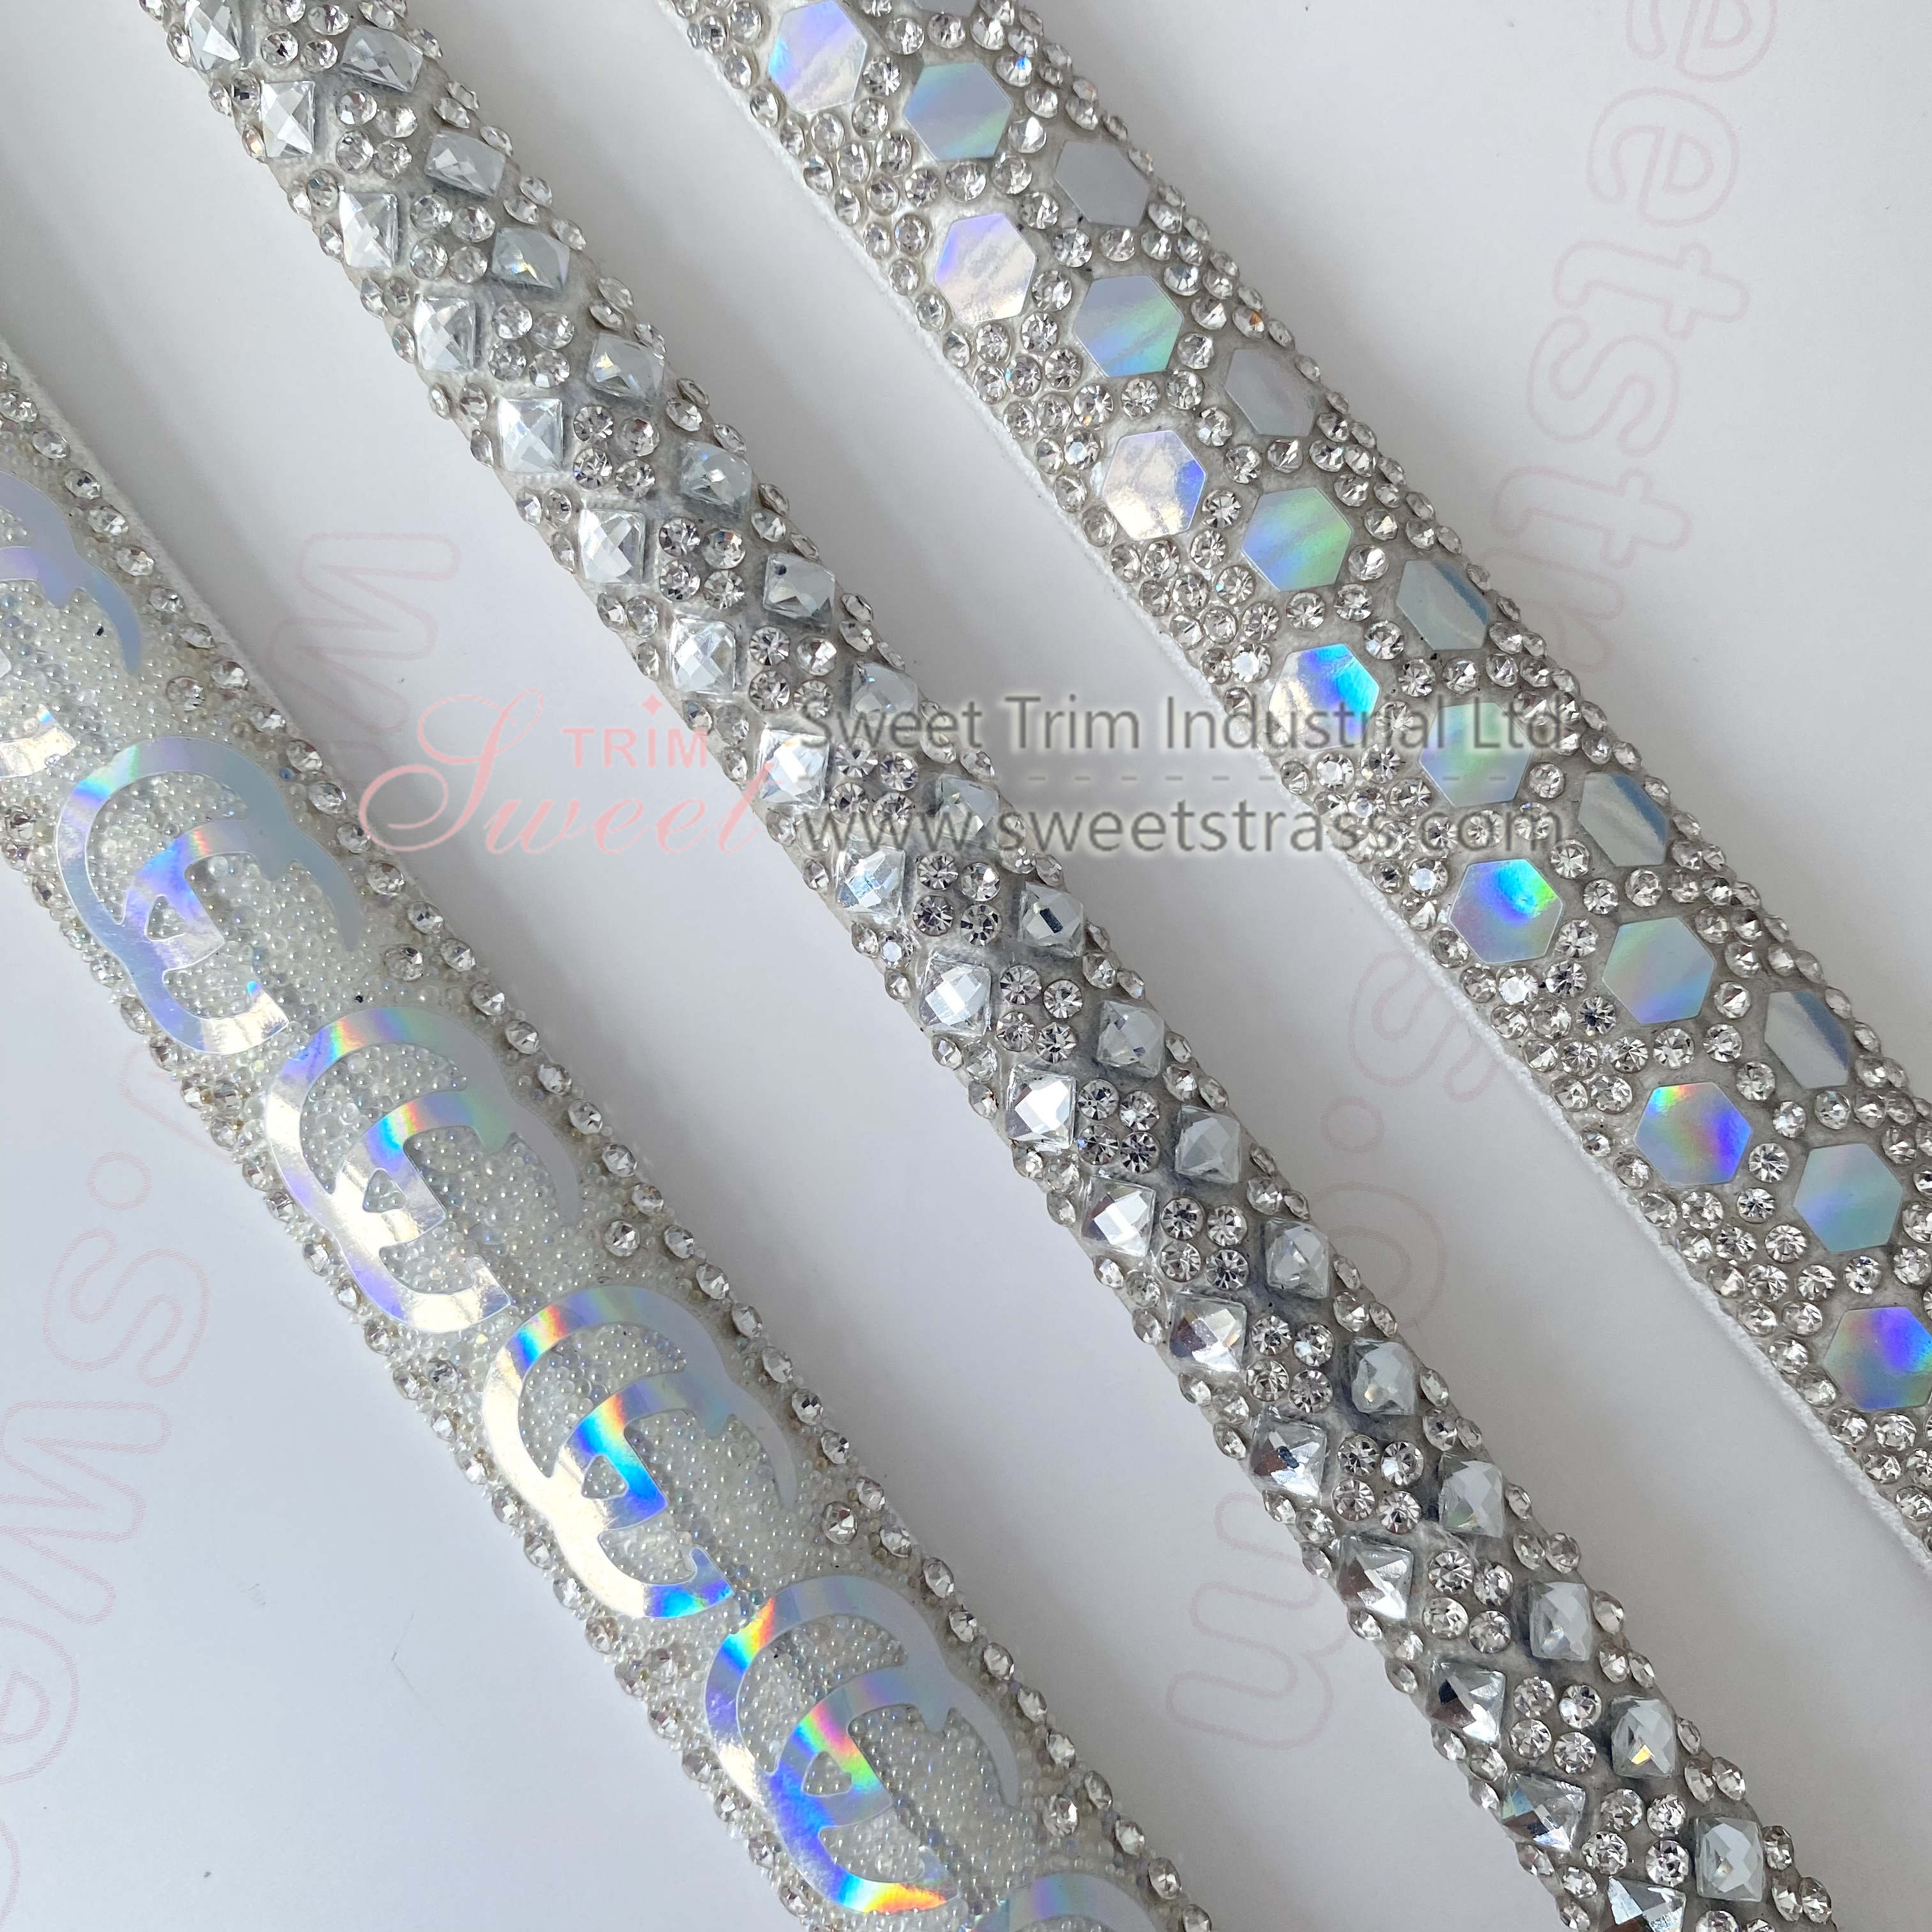 <b>Hot Sell Rhinestone Chain Stripe Rope Shoe Trimming Accessories Half Round Crystal Rope for Bags Clot</b>